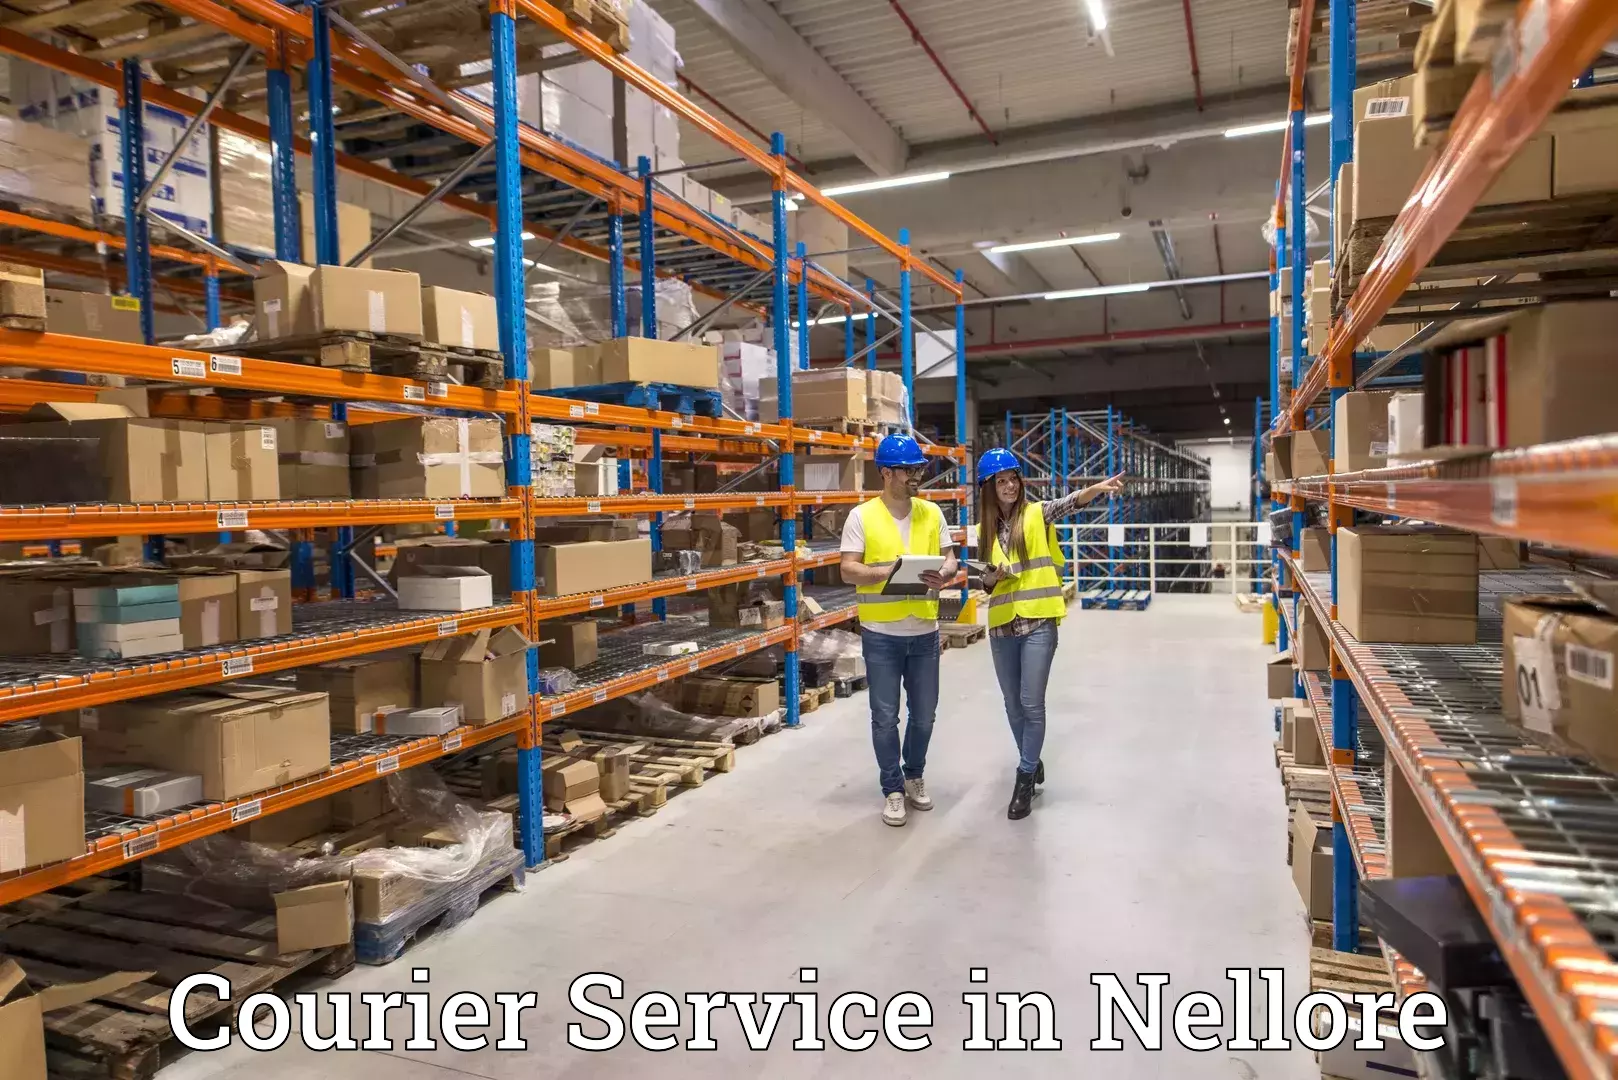 Courier service partnerships in Nellore